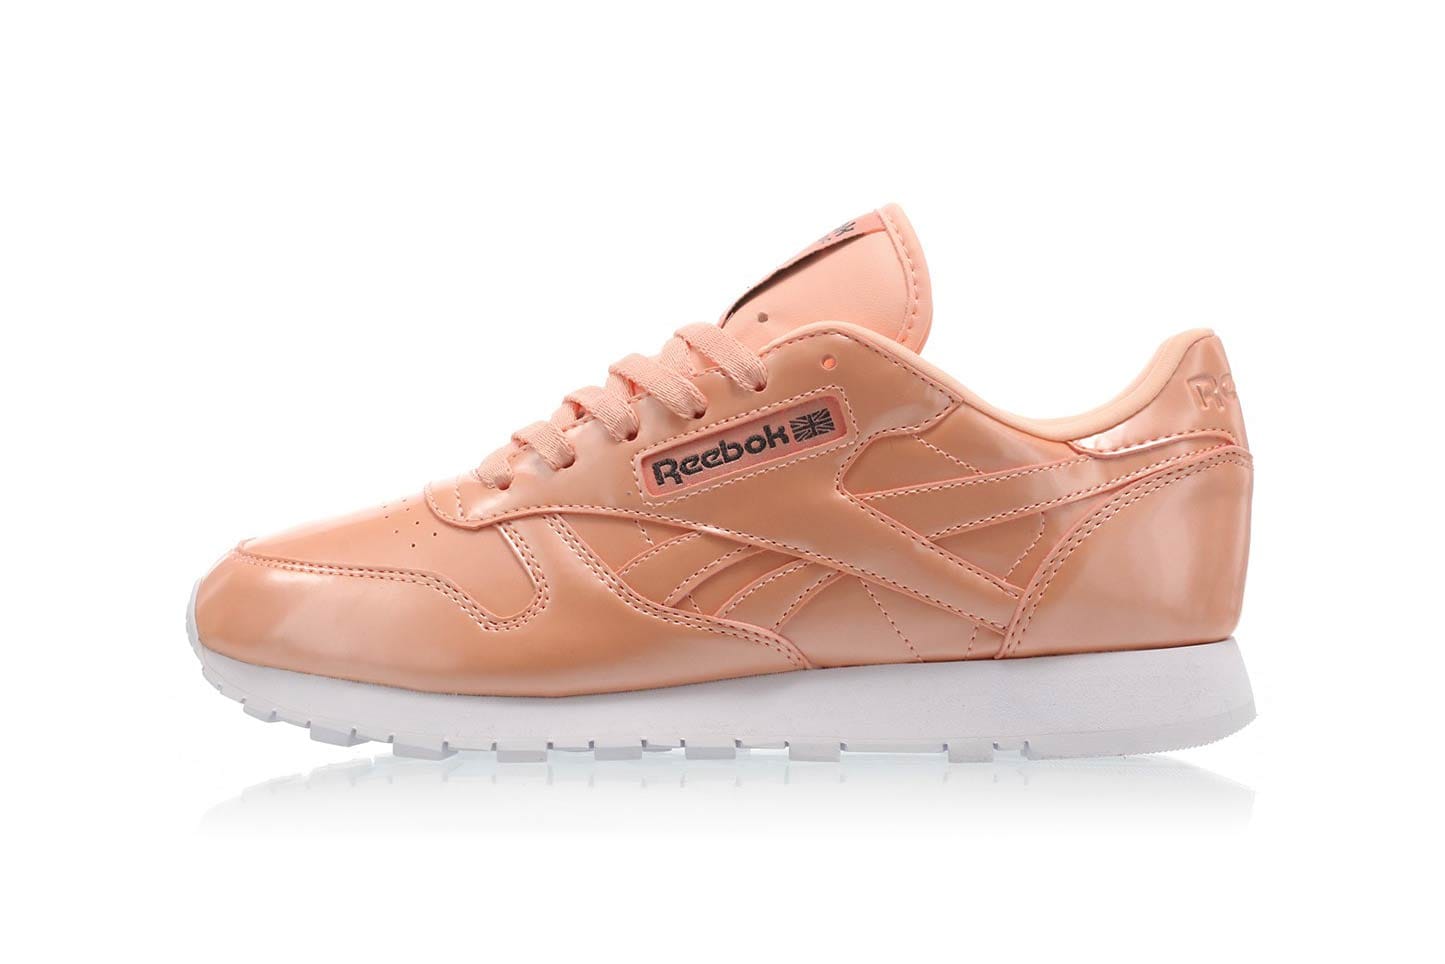 Classic Leather Arrives in Peach Twist 